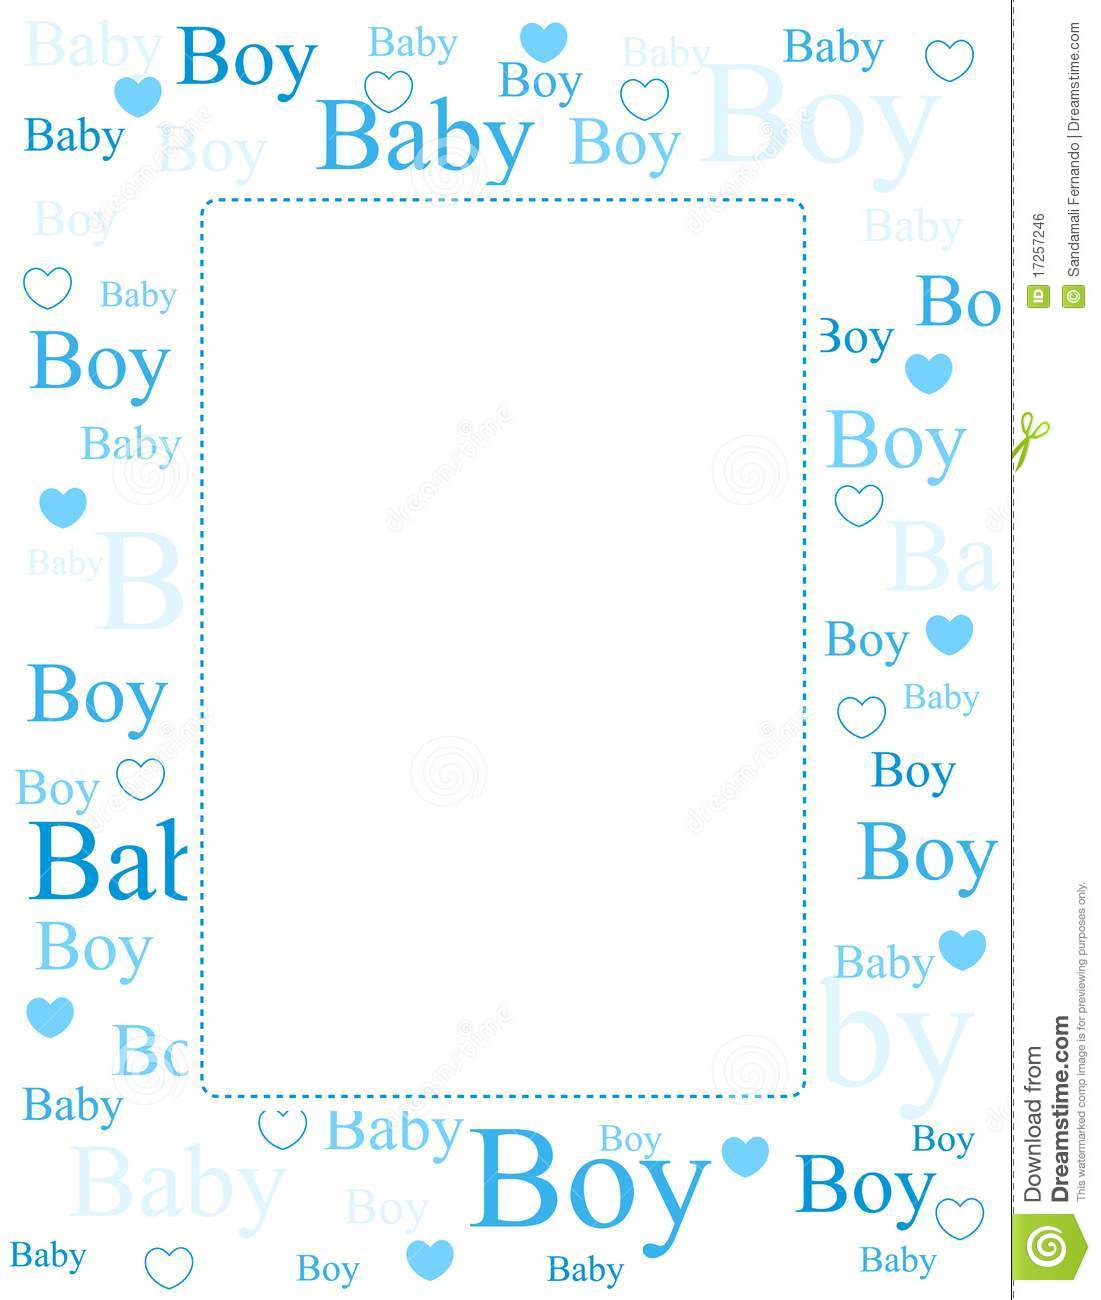 Baby Boy Arrival Card   Background Royalty Free Stock Image   Image